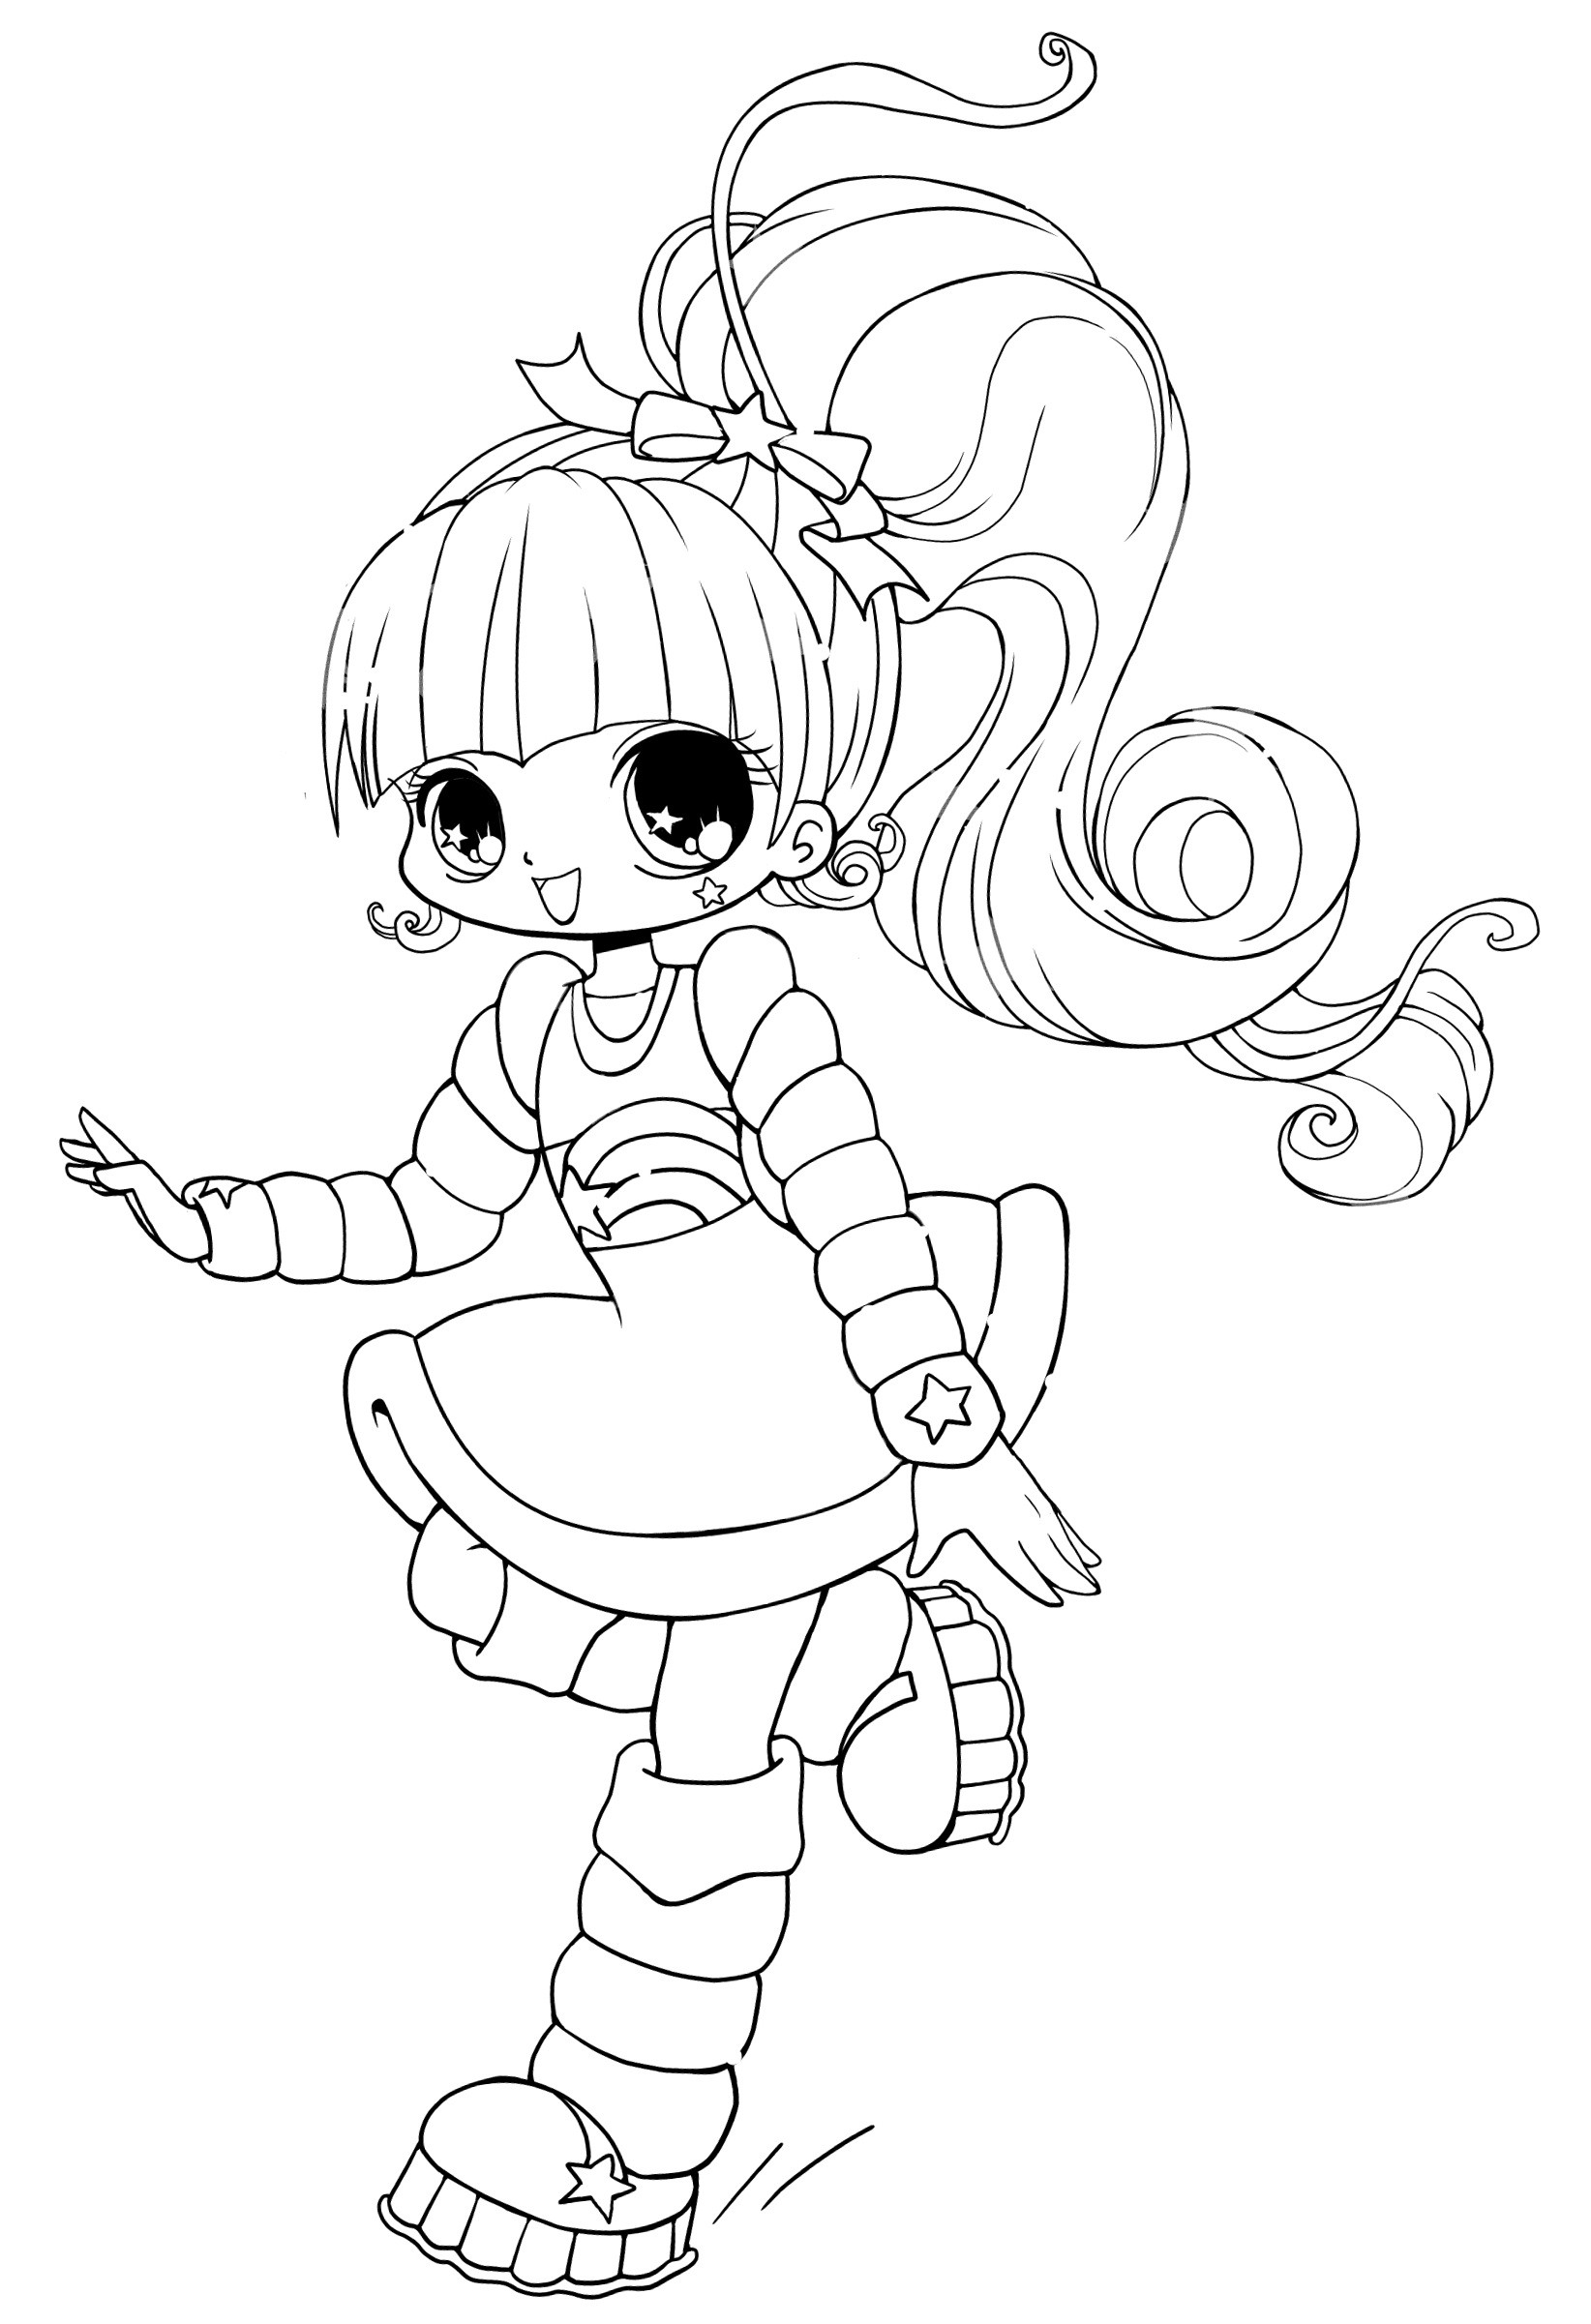 Kawaii Coloring Pages For Girls
 1000 images about dessin a colorier 12 on Pinterest